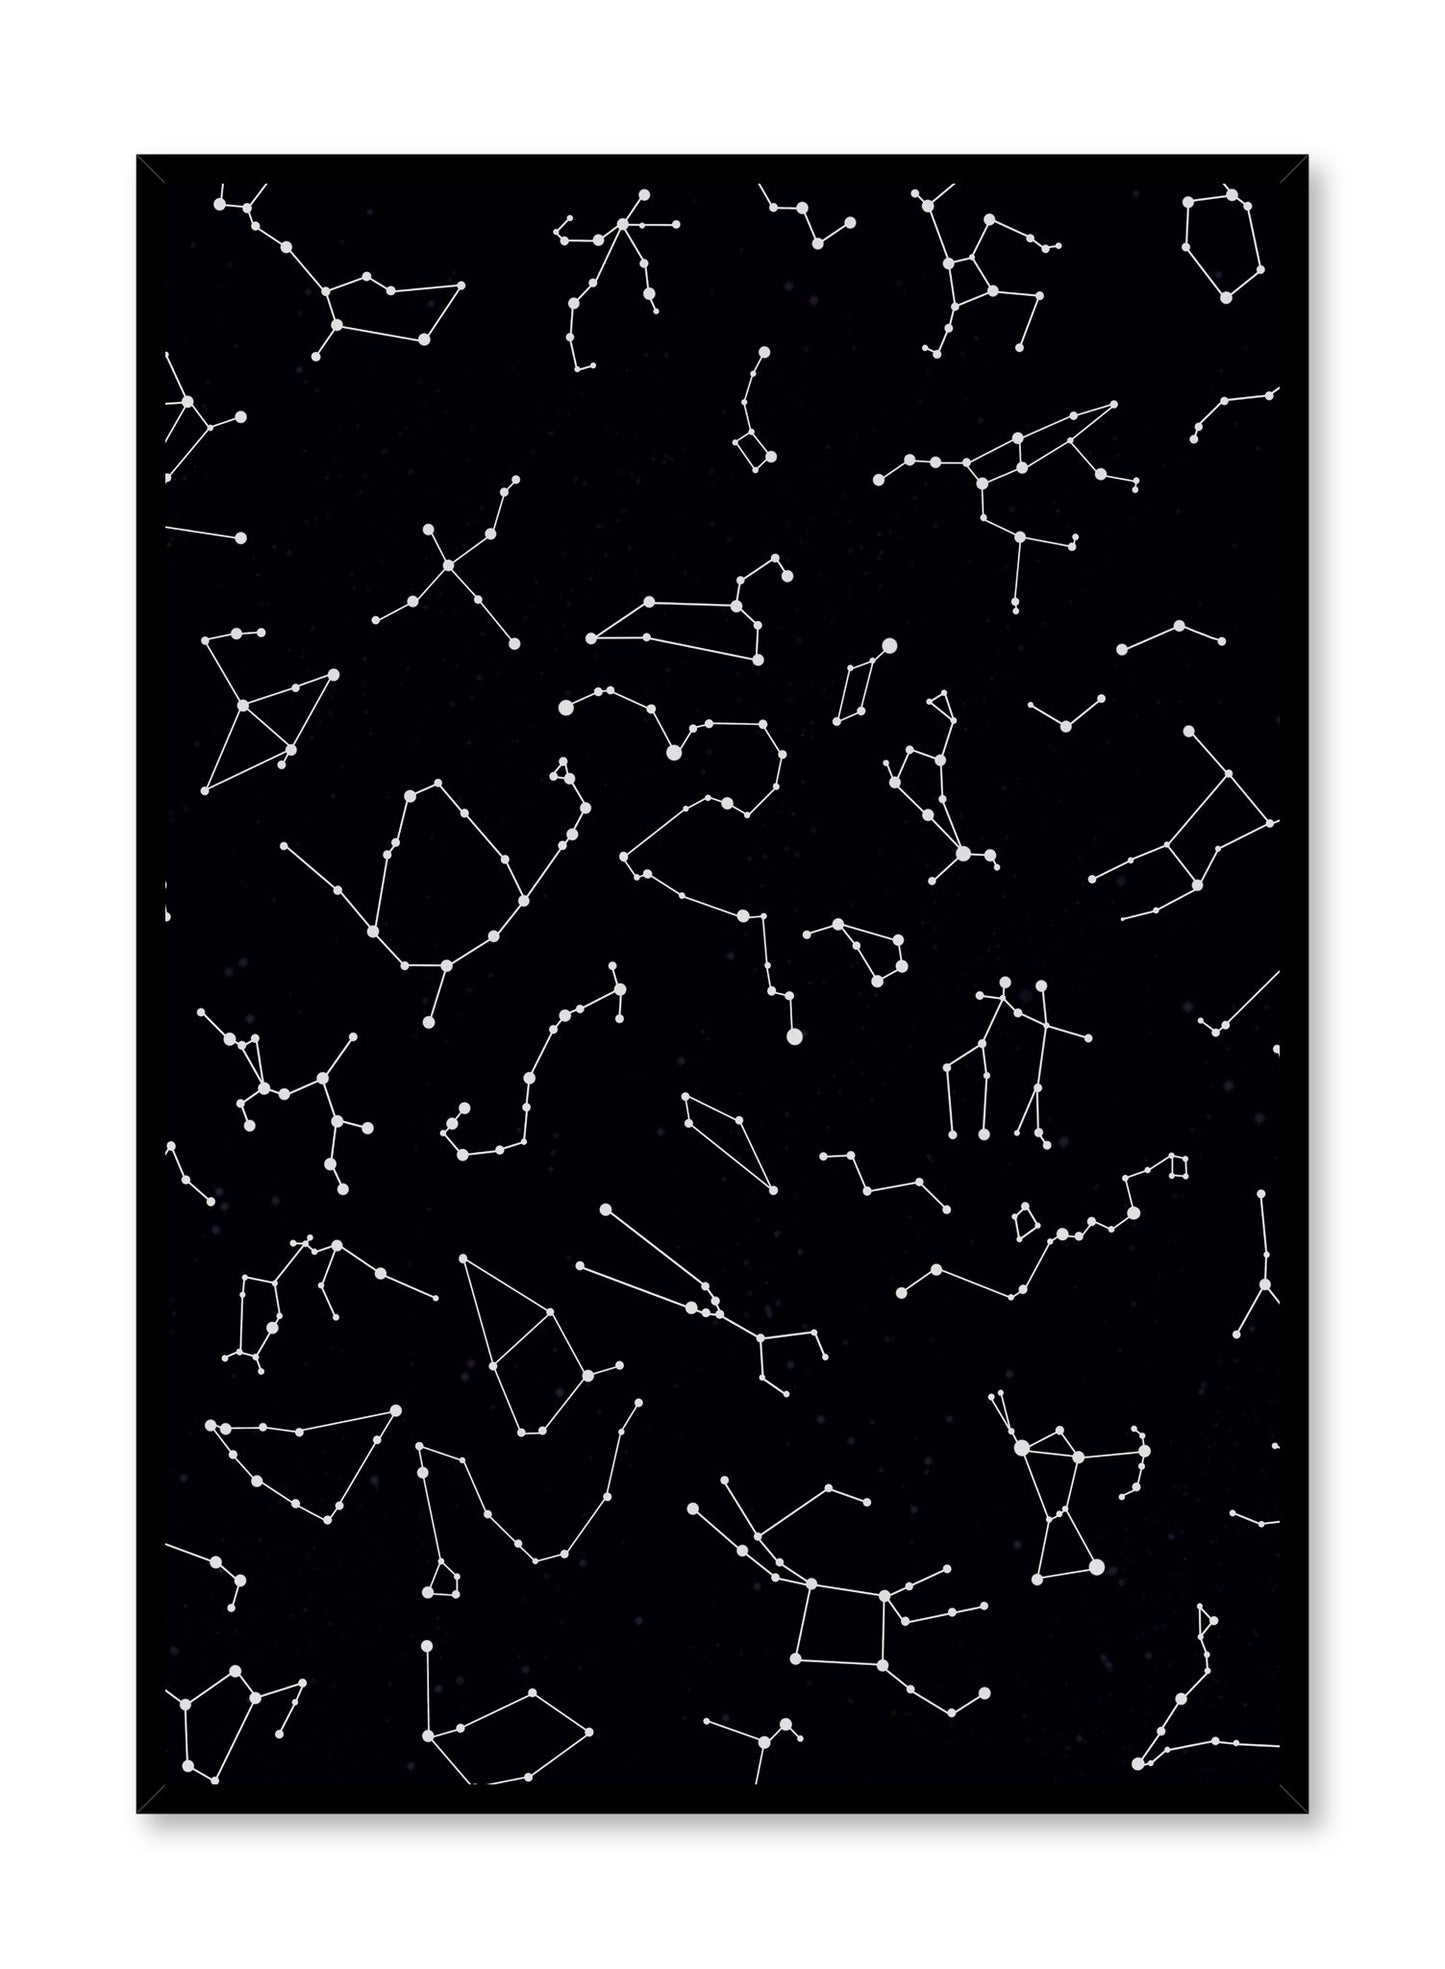 Celestial illustration poster by Opposite Wall with star constellations